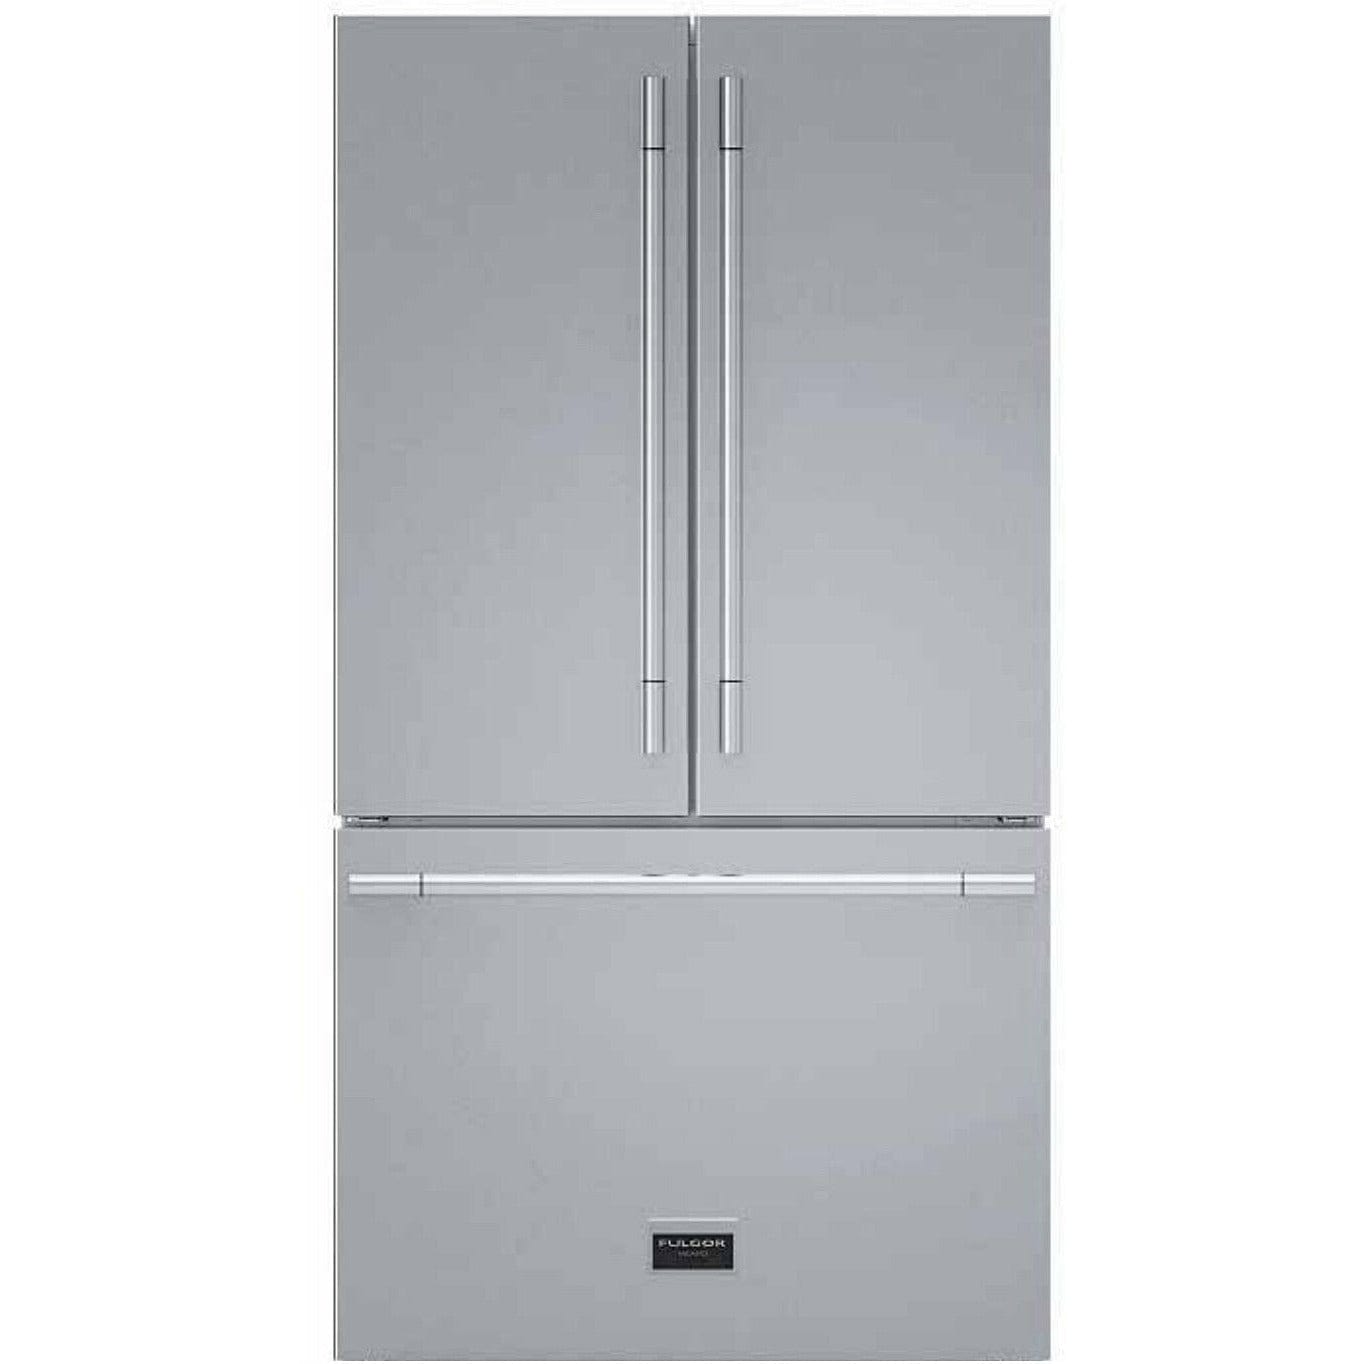 Fulgor Milano Package 30" Double Electric Wall Oven, 36" French Door Refrigerator, 30" Gas Rangetop, 30" Wall Mount Range Hood and 24" Built-In Dishwasher Wall Oven F6PDP30S1F6FBM36S2 Luxury Appliances Direct